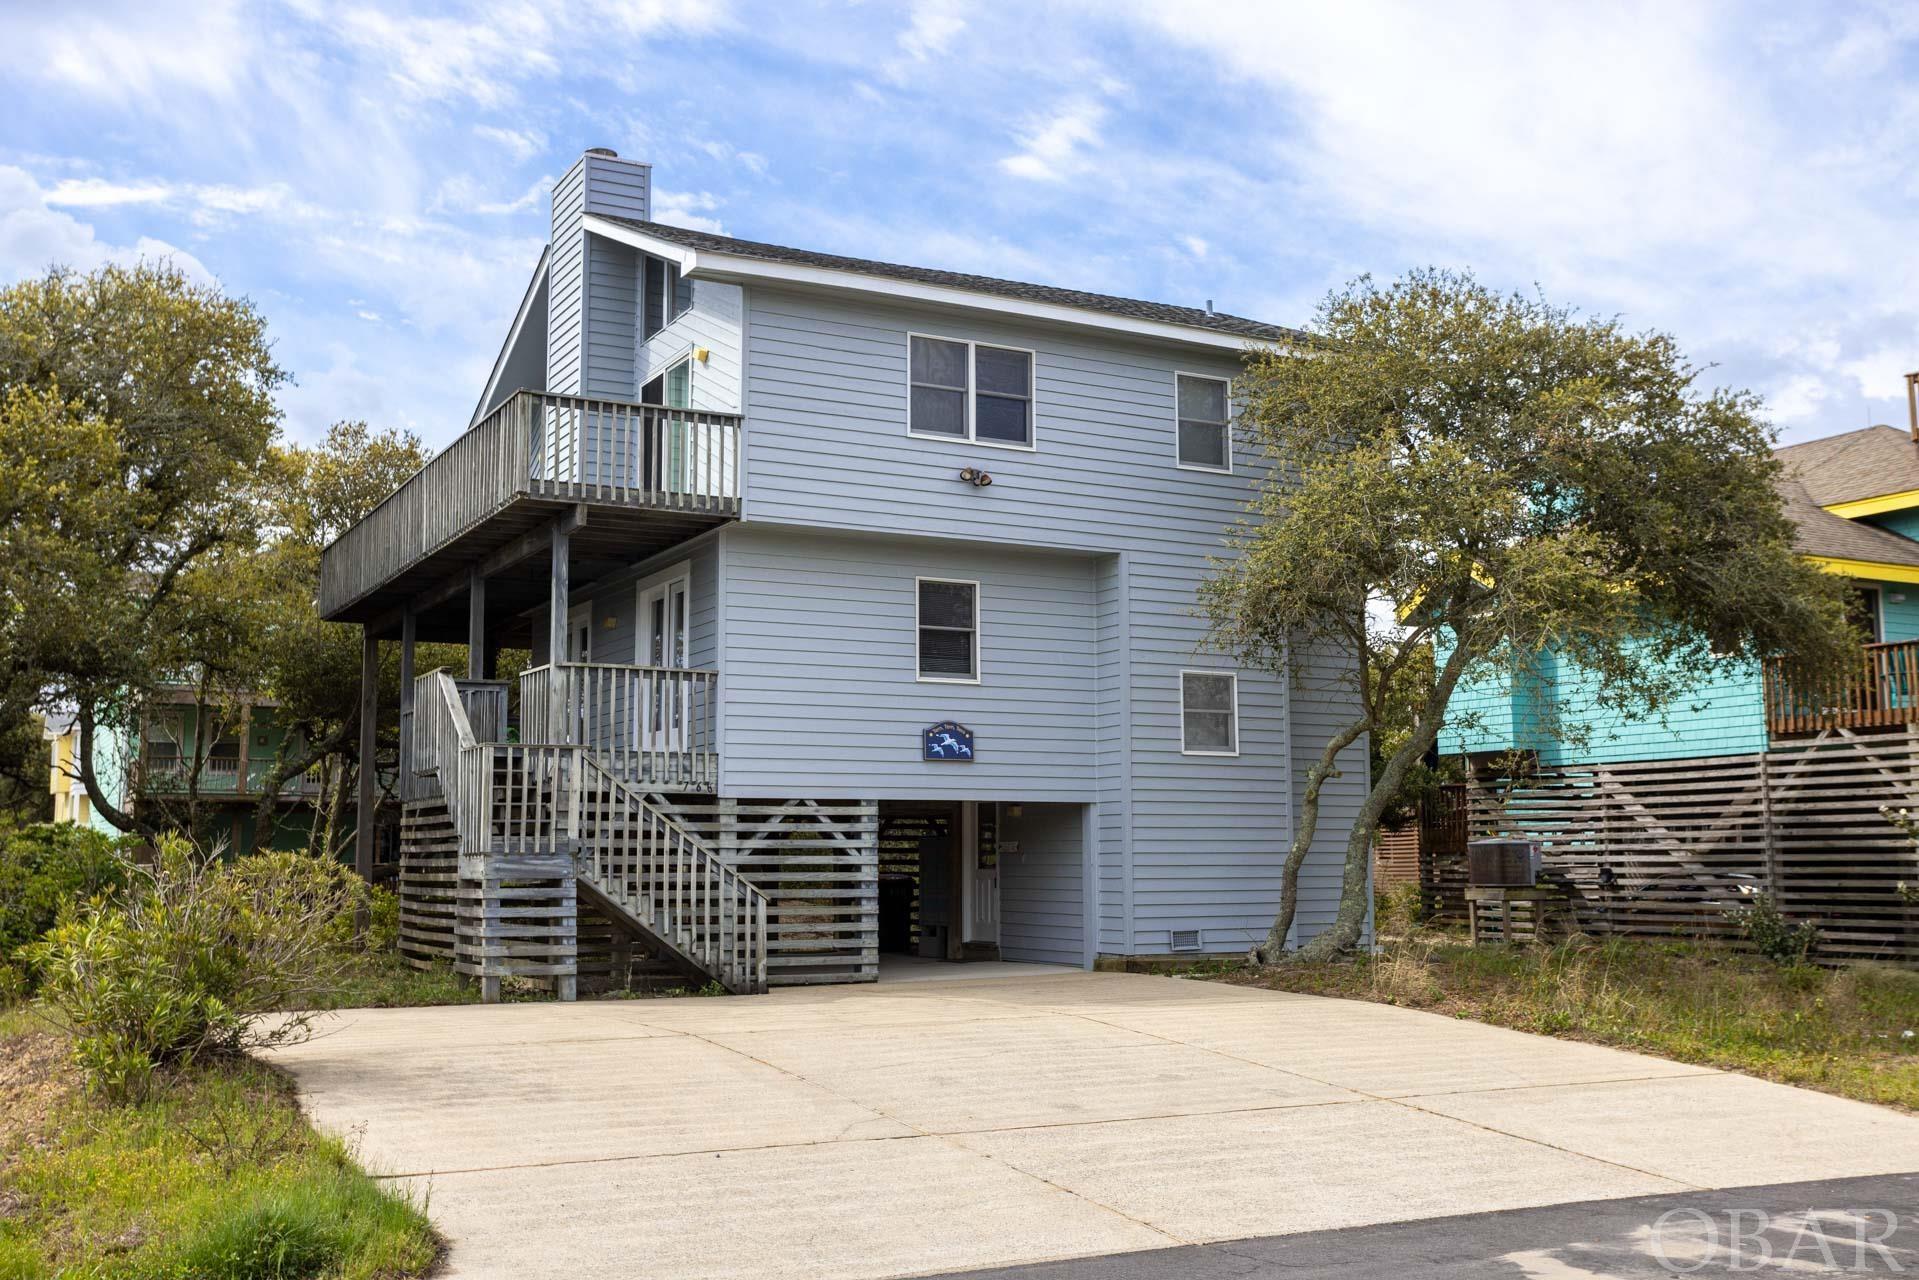 766 Bayberry Court, Corolla, NC 27927, 4 Bedrooms Bedrooms, ,2 BathroomsBathrooms,Residential,For sale,Bayberry Court,125457